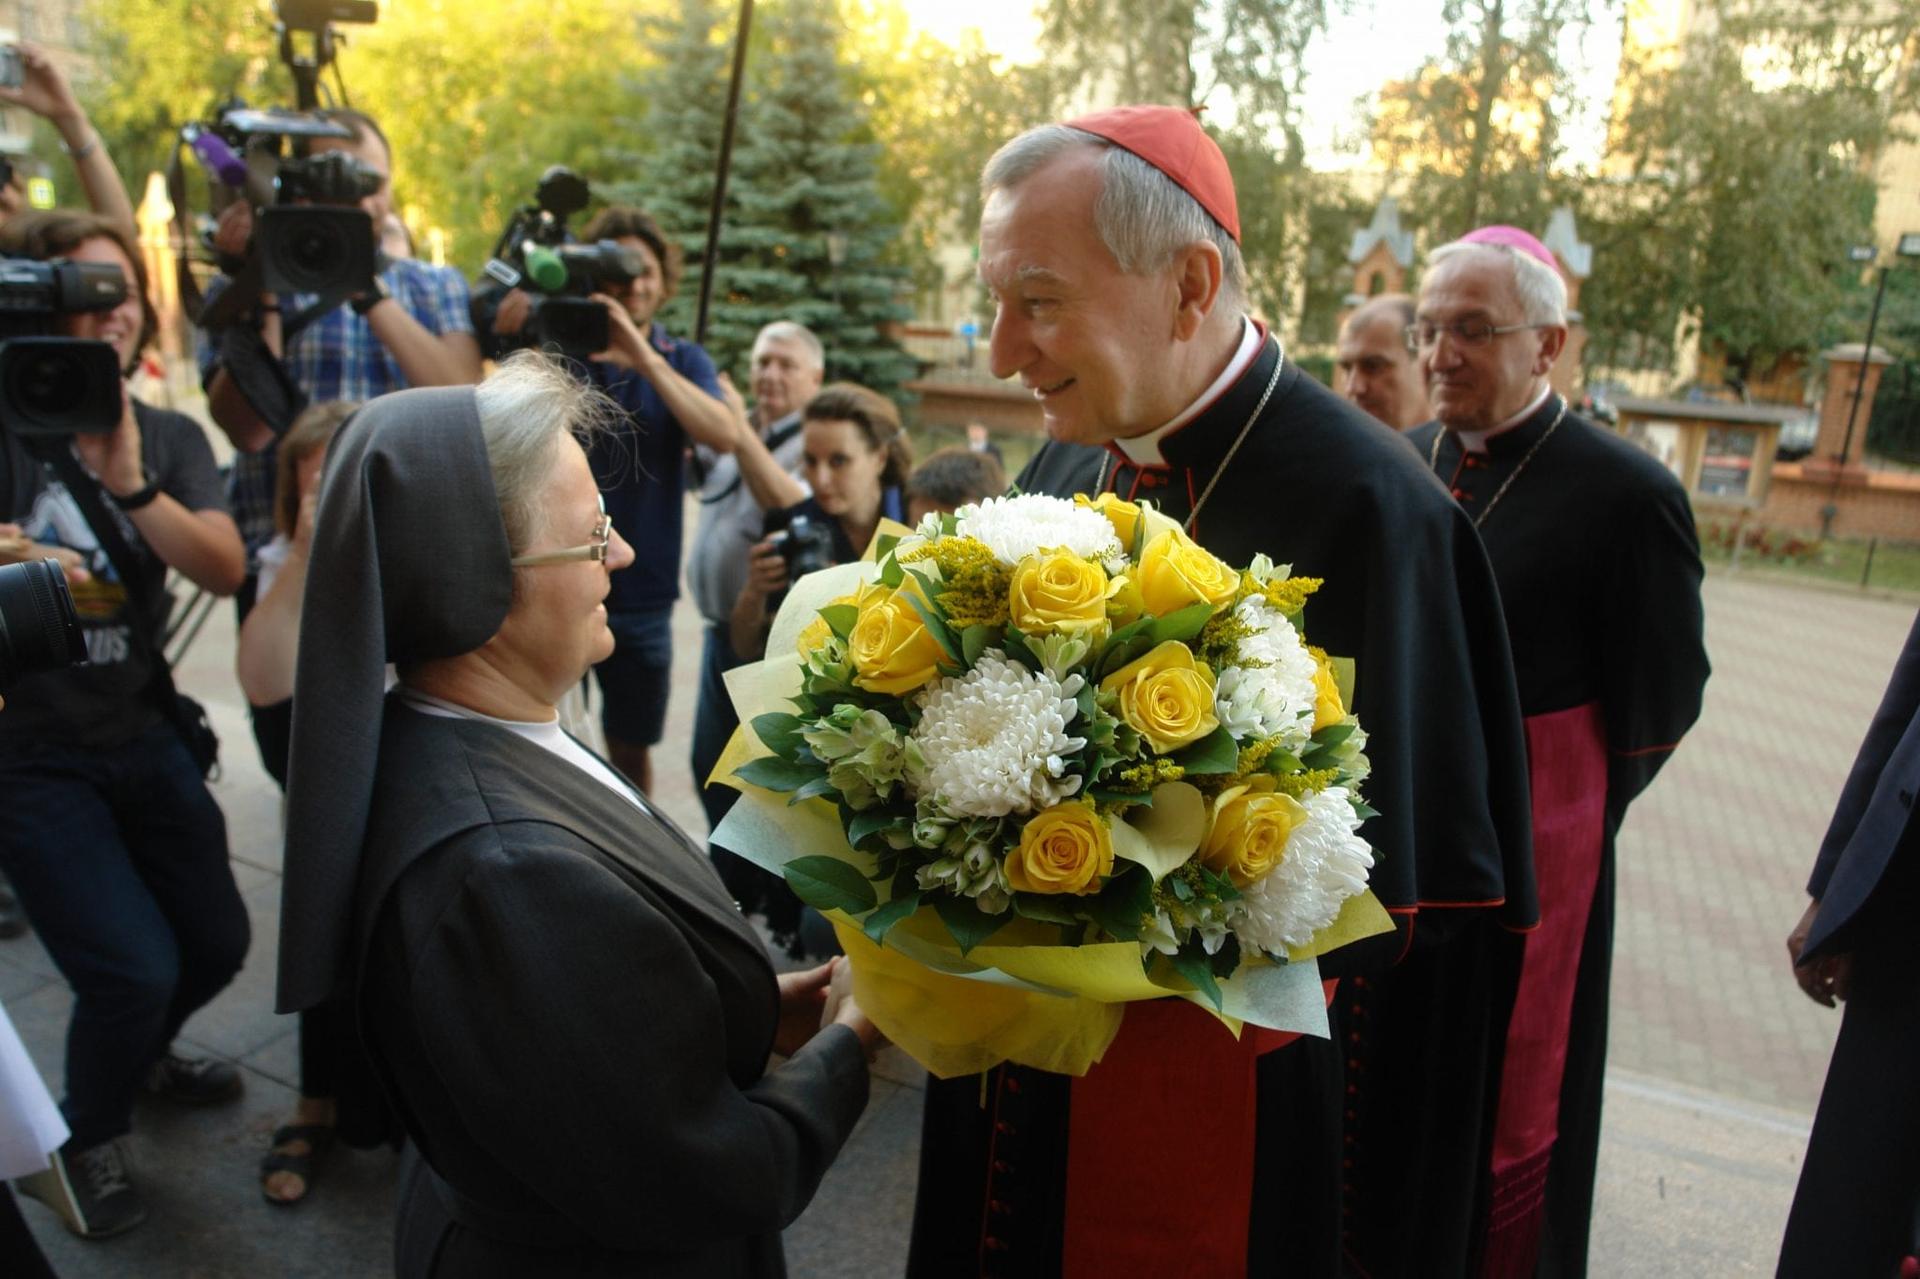 Russian Catholics hope Parolin visit improves situation for local Church